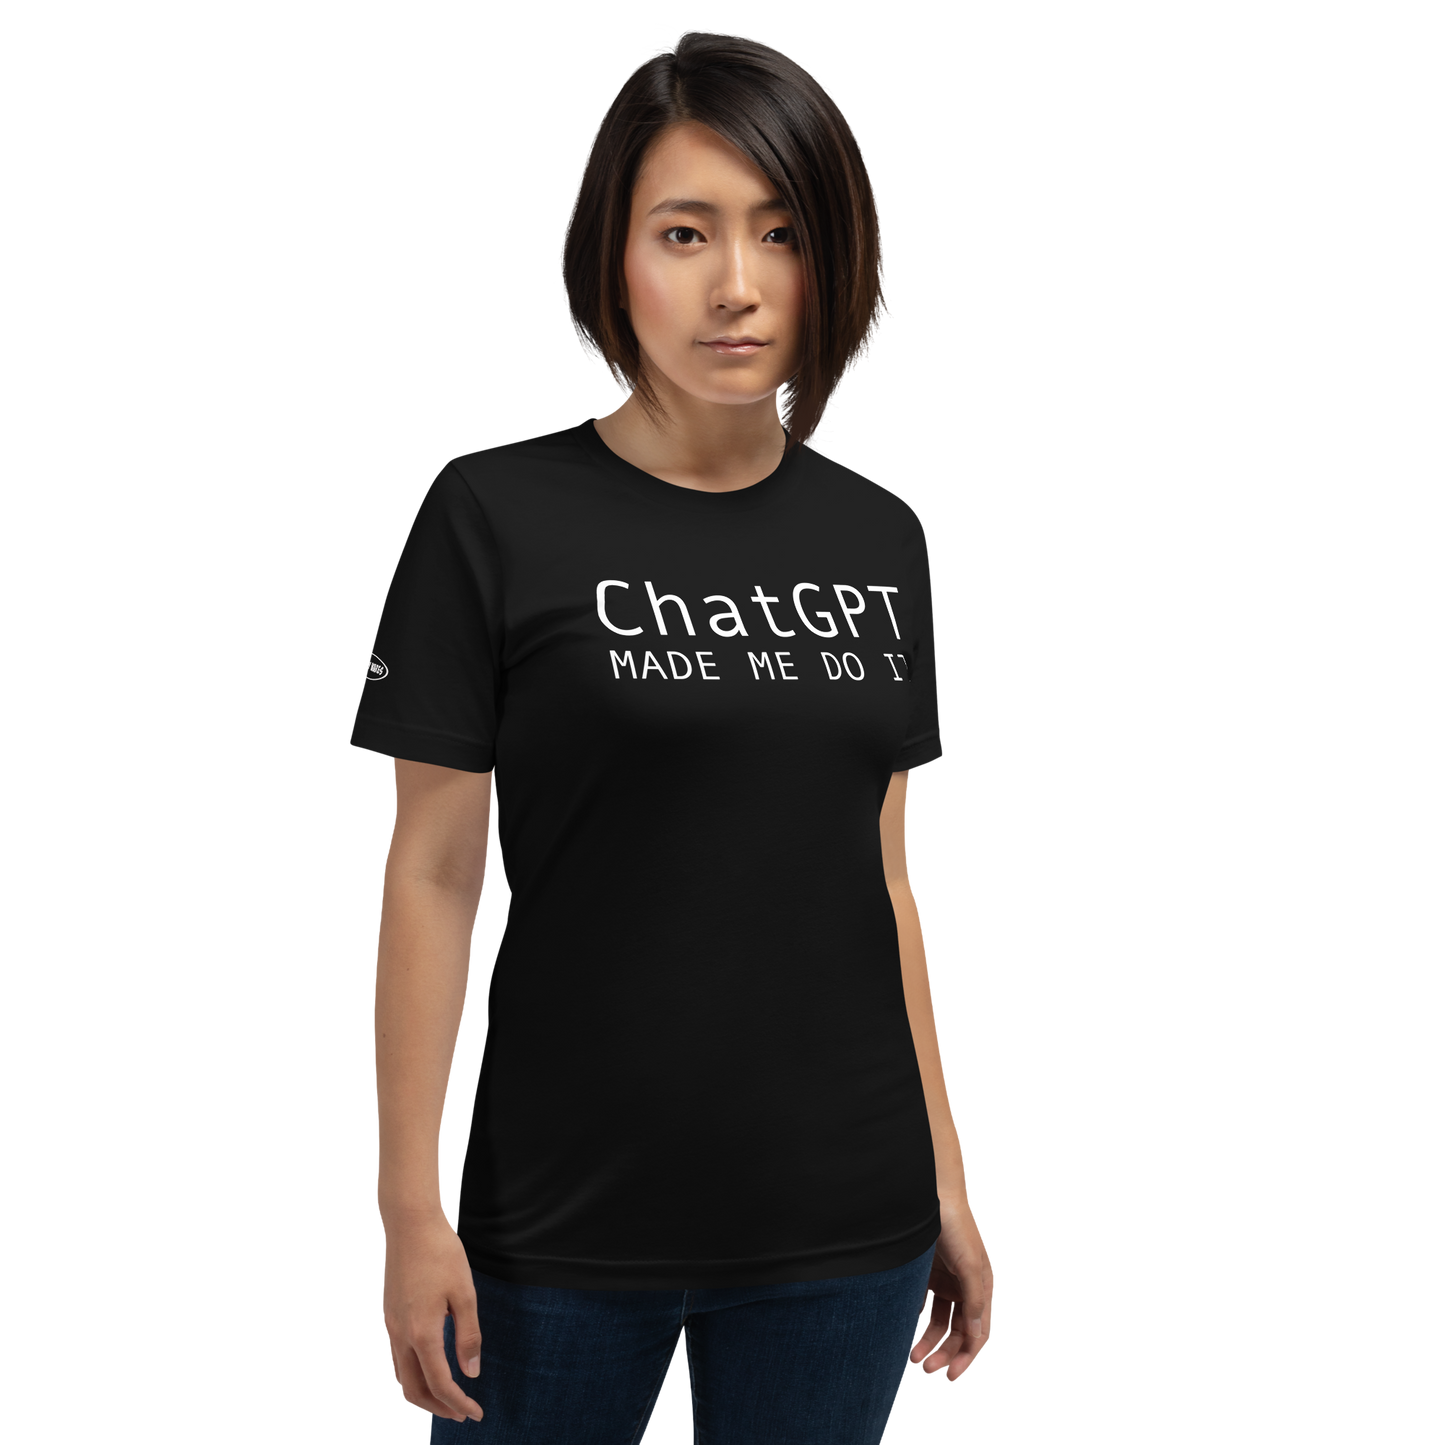 ChatGPT Made Me do it - Funny T-Shirt